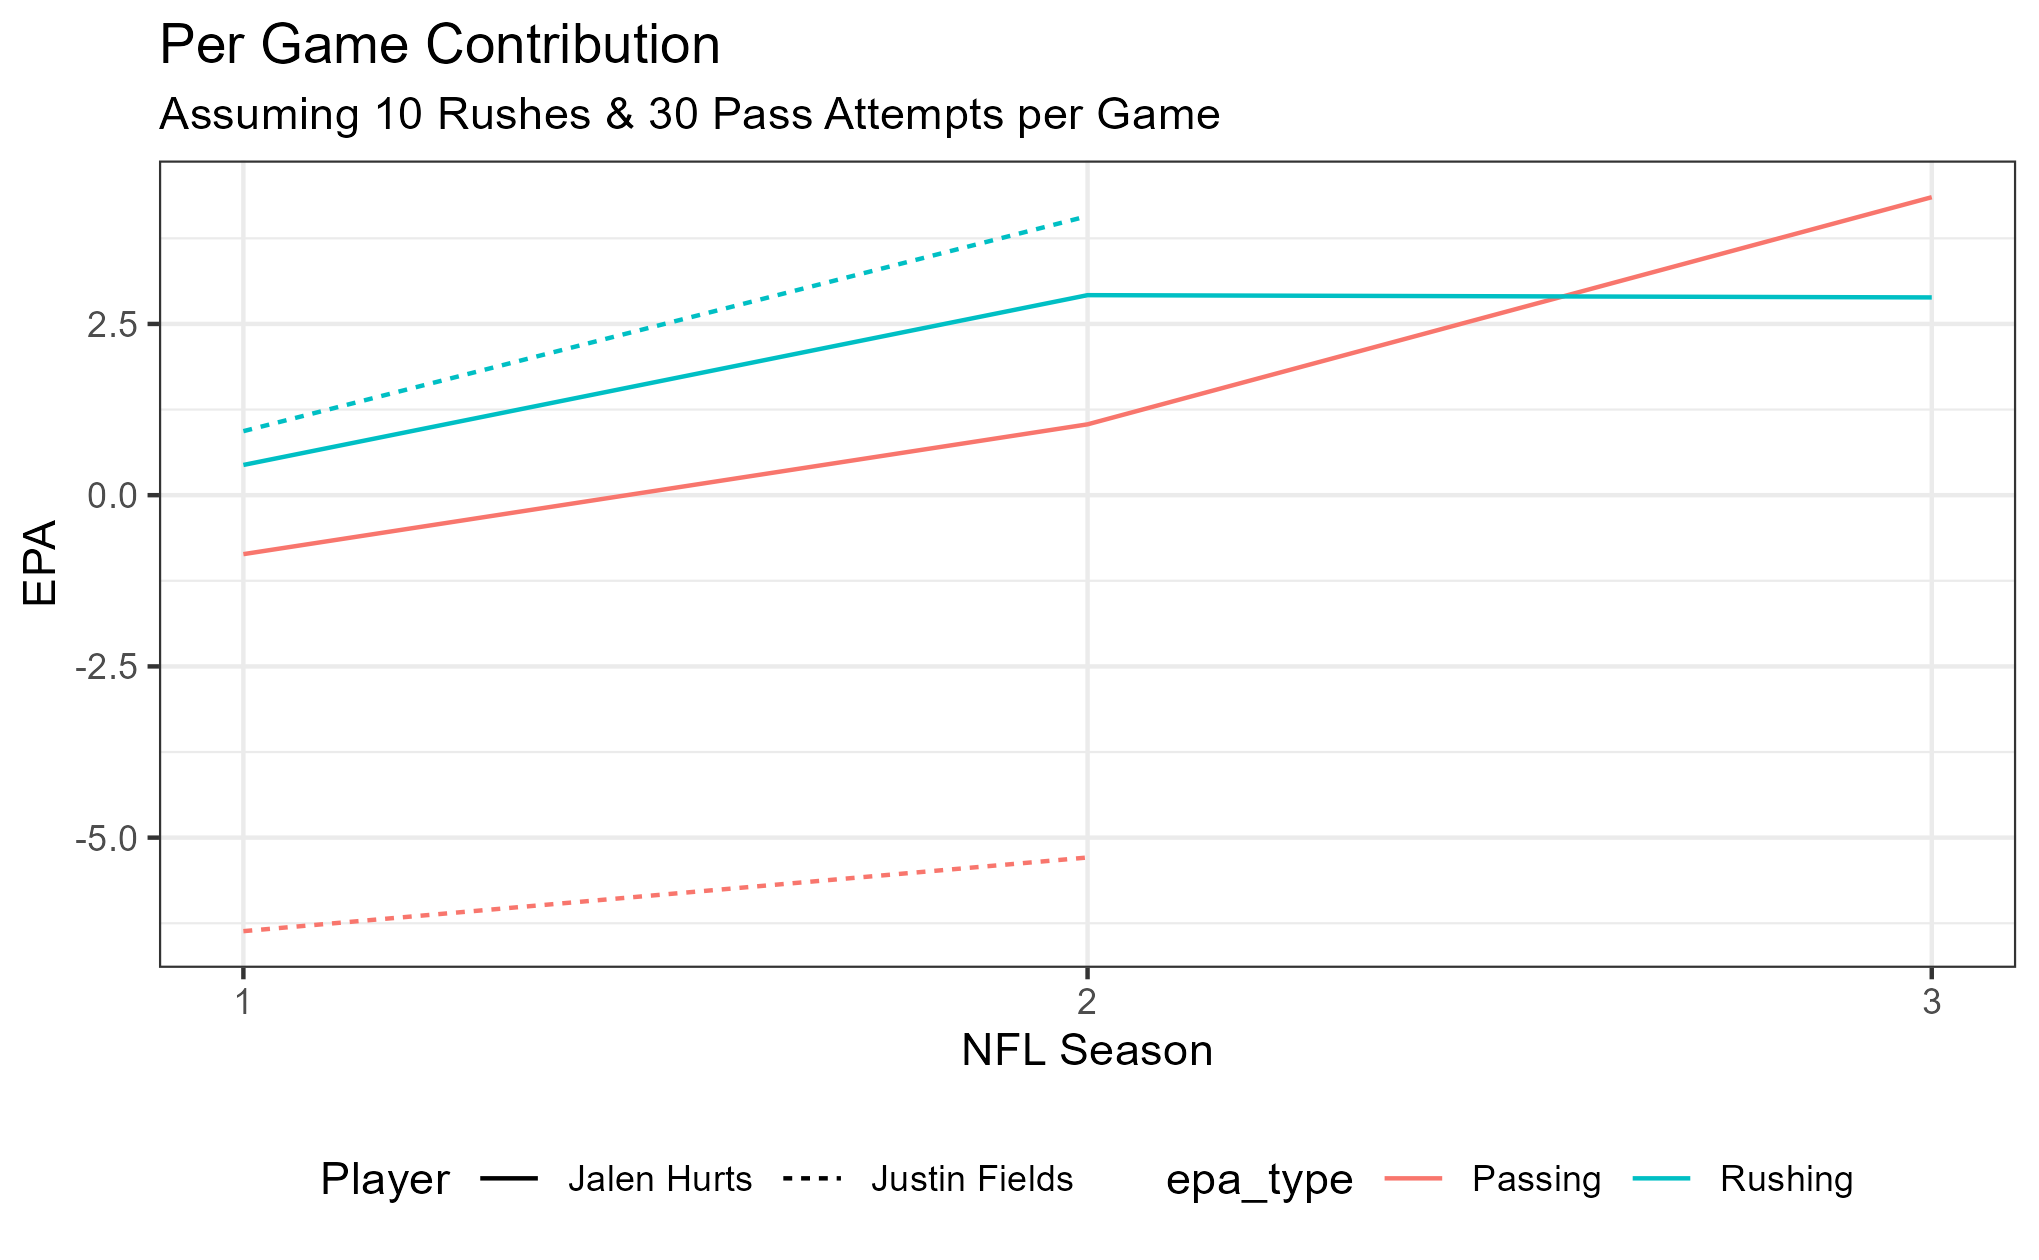 Chart showing Per Game Contributions, EPA over seasons